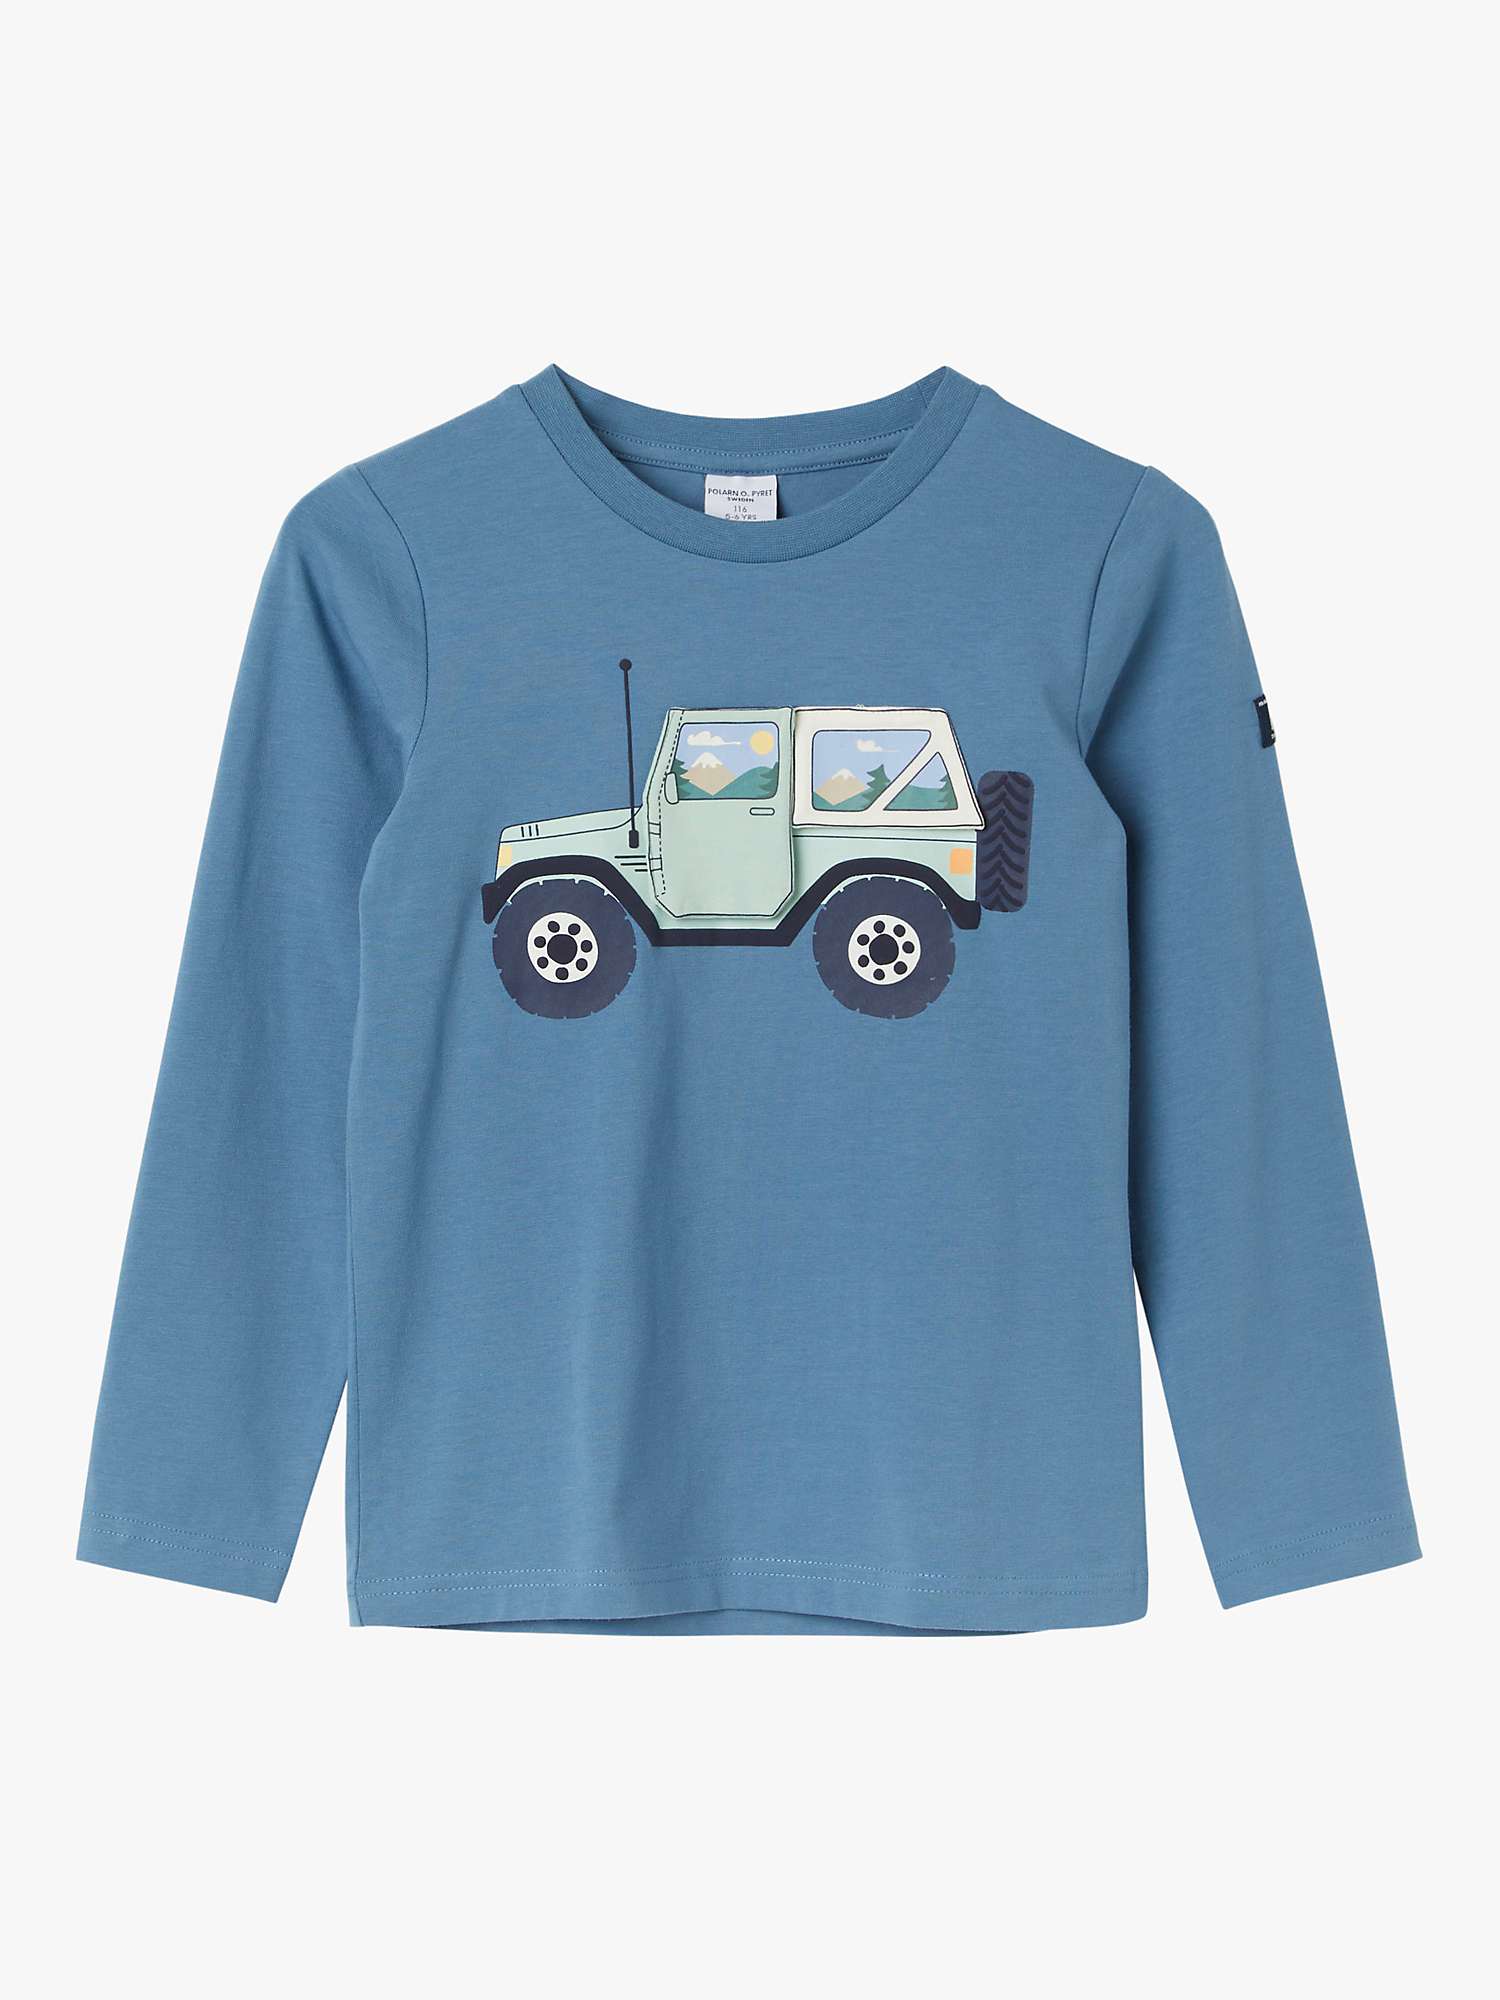 Buy Polarn O. Pyret Kids' Organic Cotton Jeep Long Sleeve Top, Blue Online at johnlewis.com